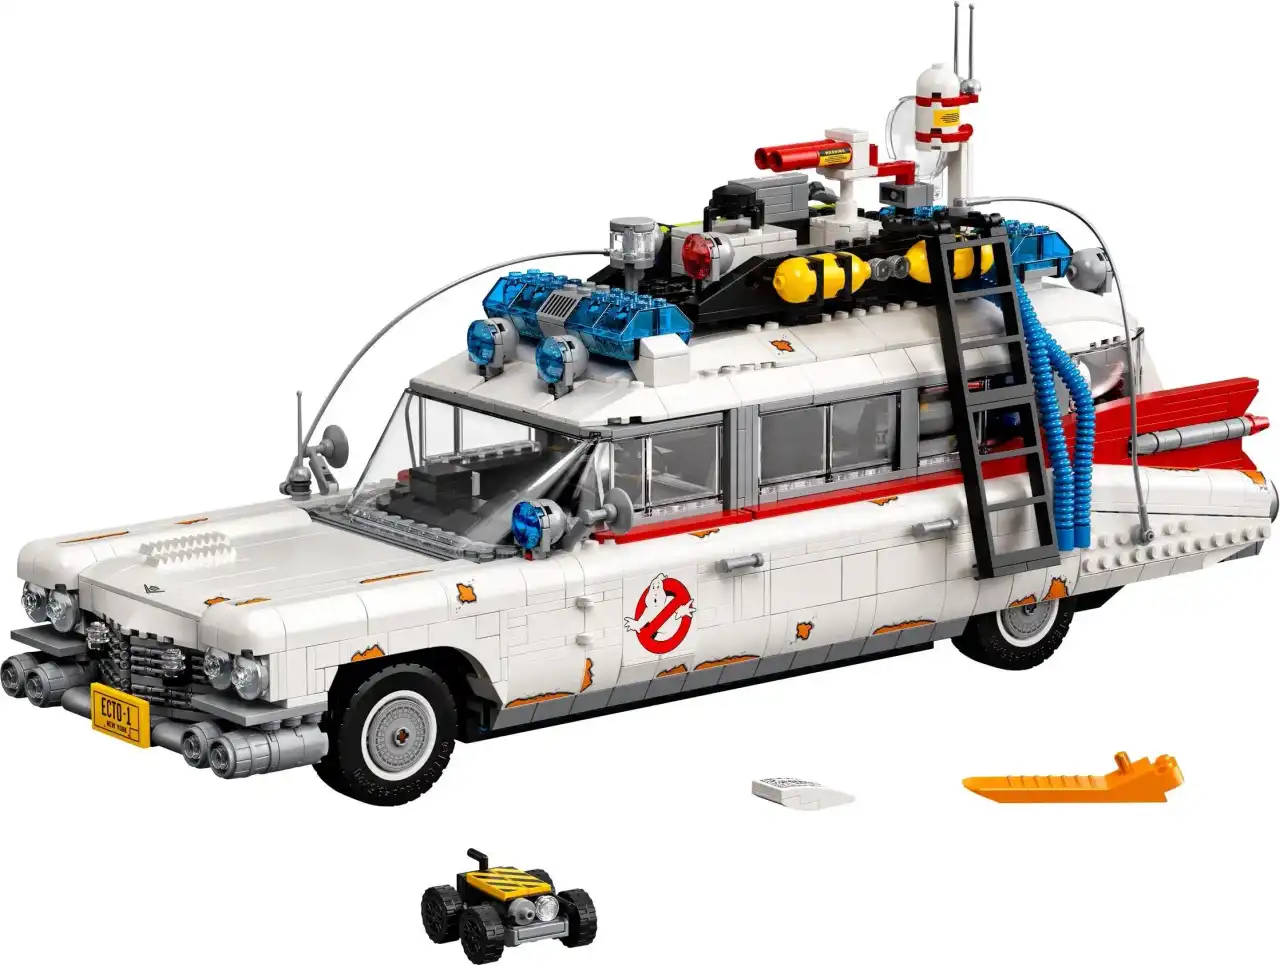 10274 - Ghostbusters ECTO-1